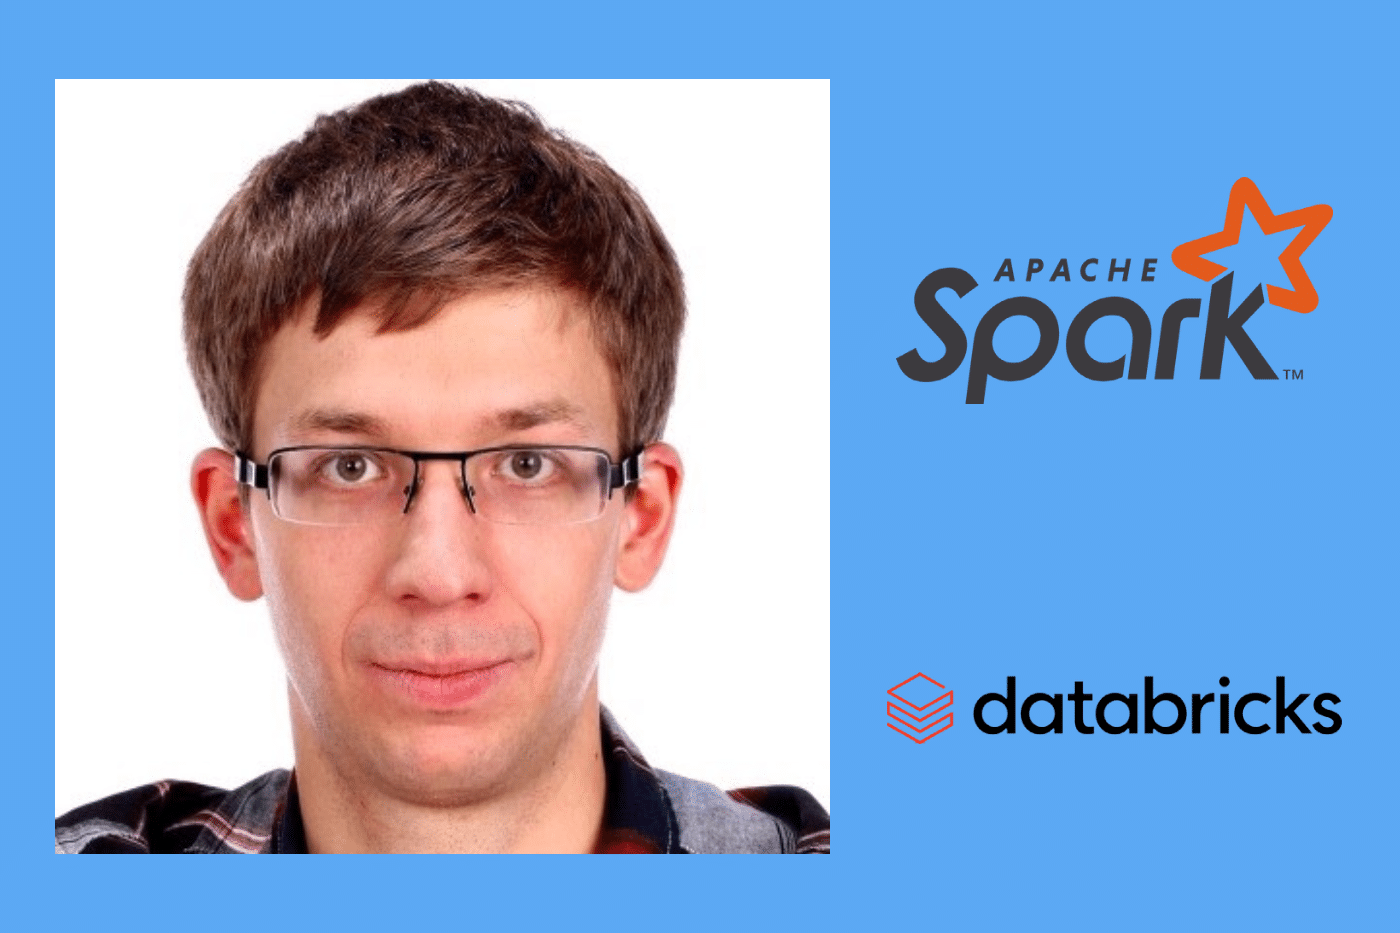 Bringing Reliable Data and AI to the Cloud: A Q&A with Databricks’ Matei Zaharia